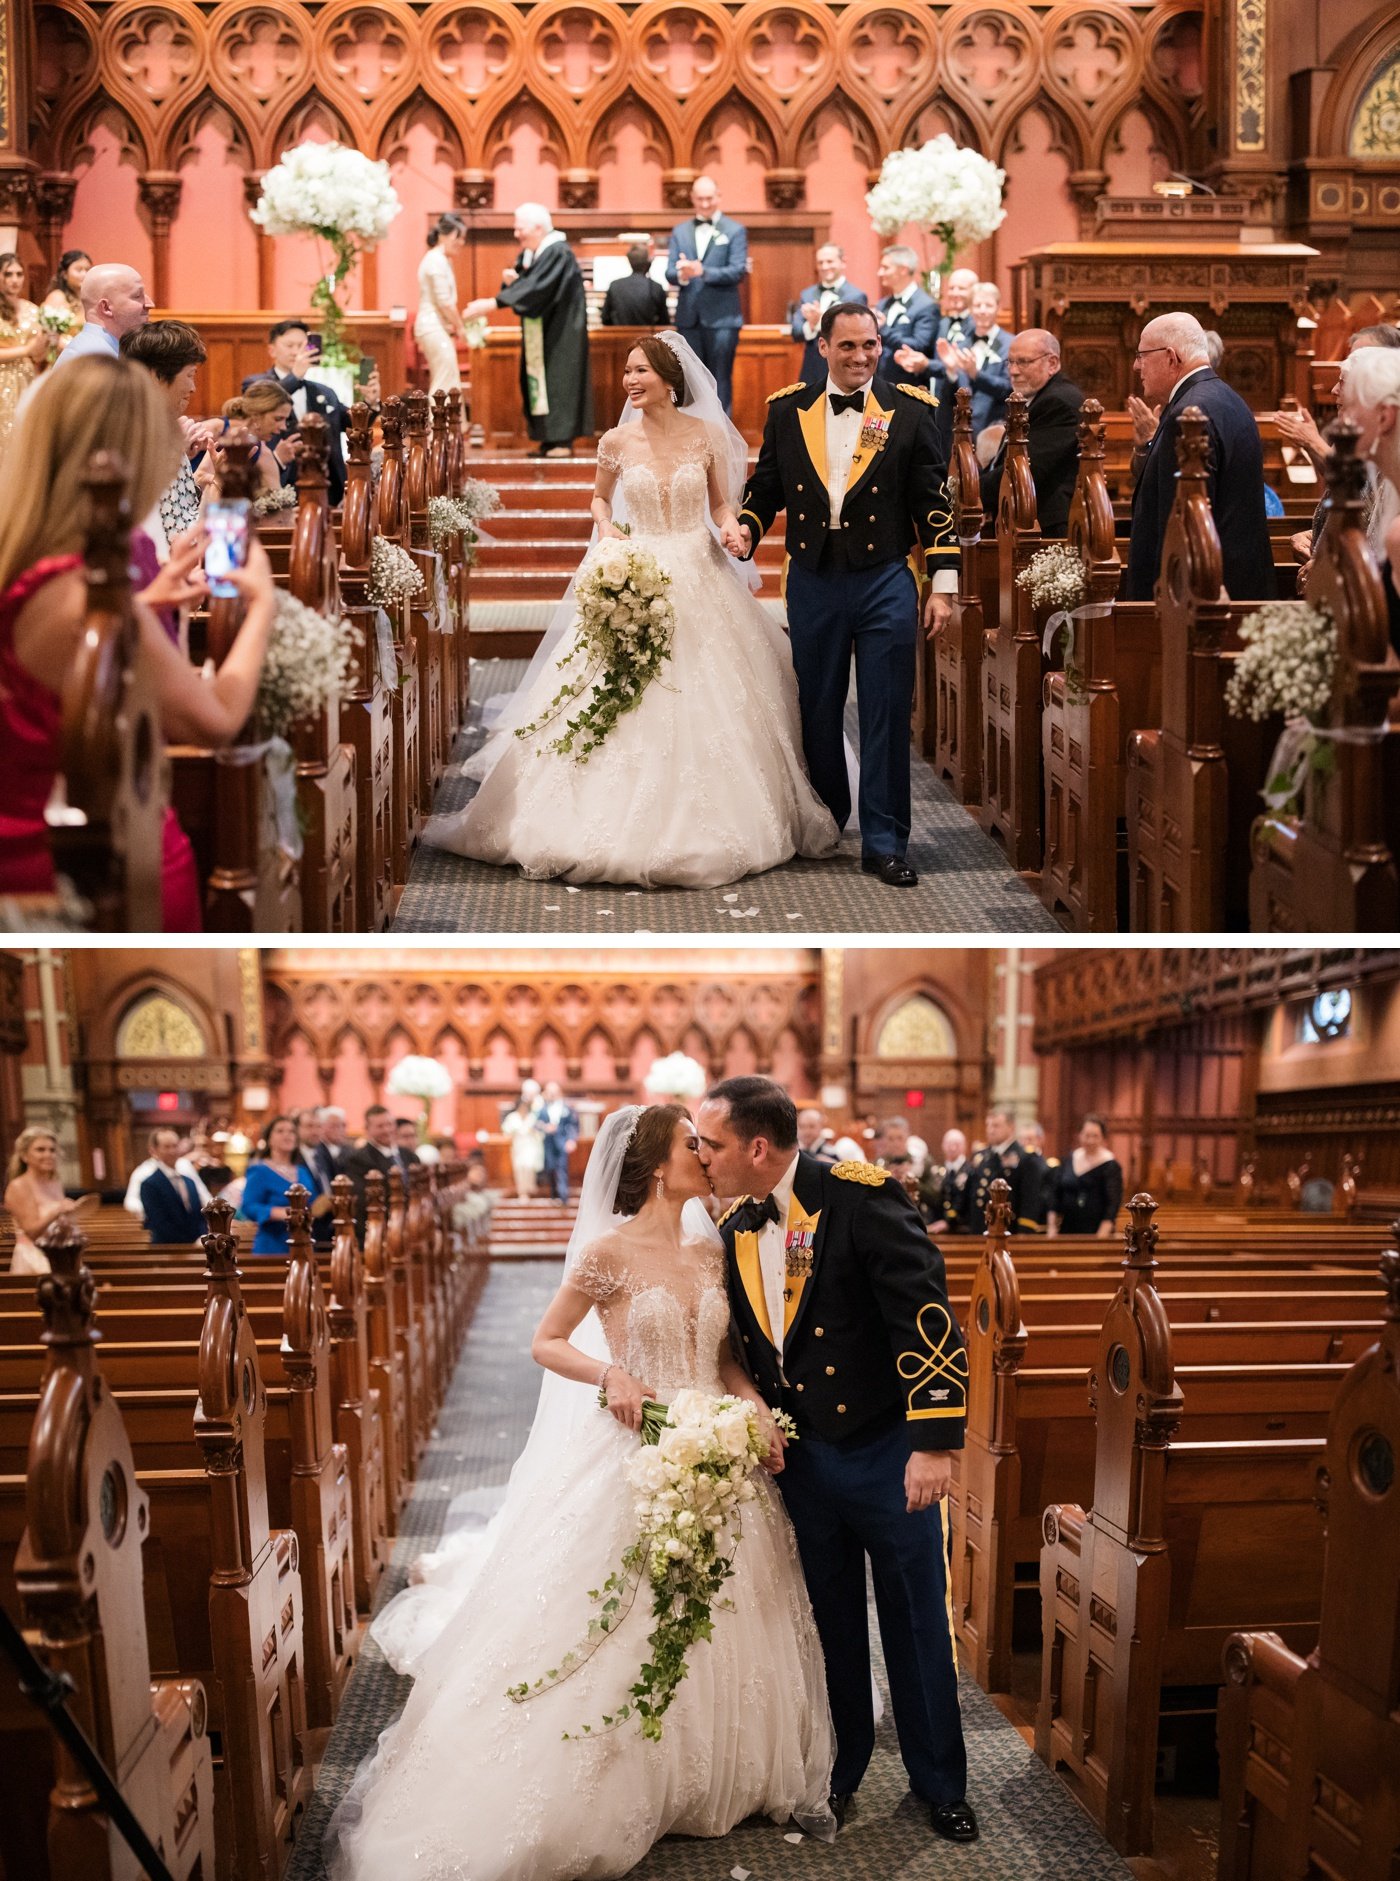 Wedding ceremony at Old South Church in Boston, MA